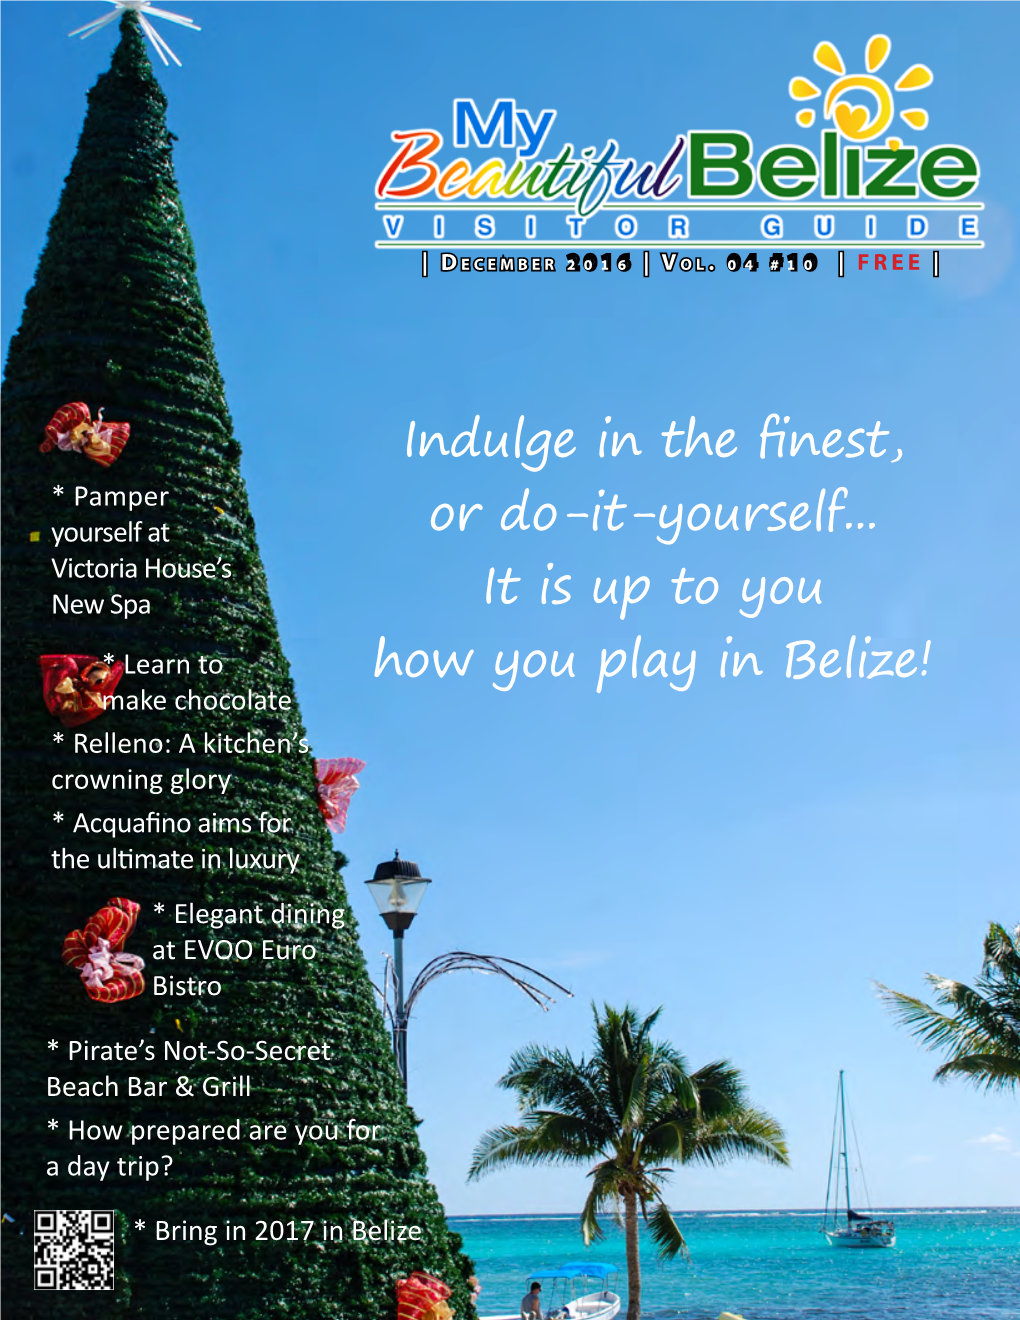 Indulge in the Finest, Or Do-It-Yourself... It Is up to You How You Play in Belize!